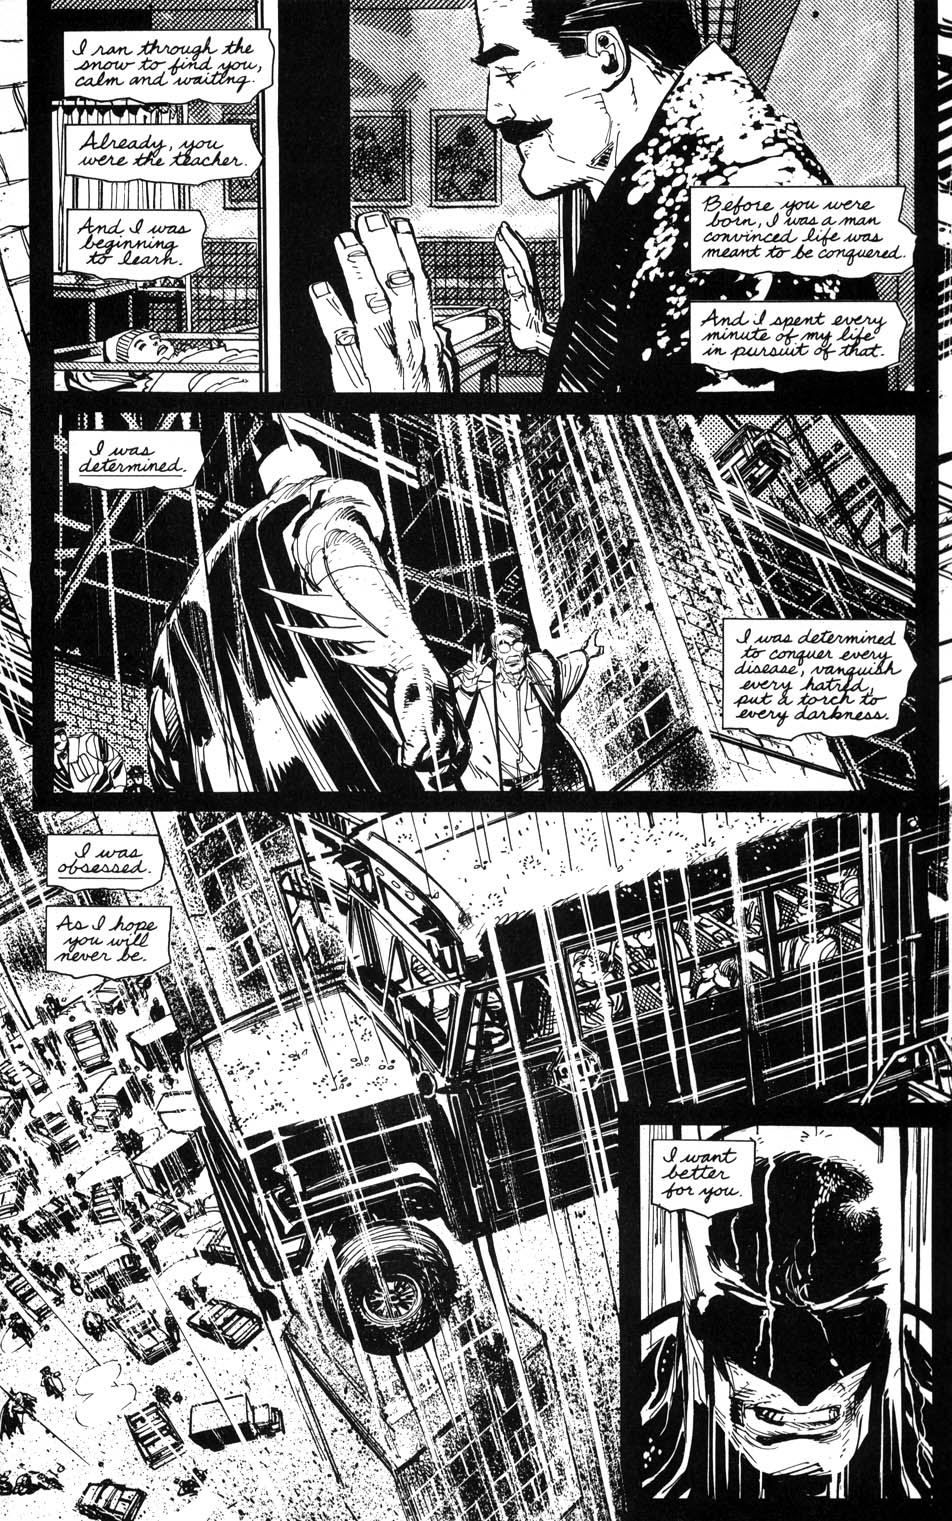 Read online Batman Black and White comic -  Issue #3 - 9